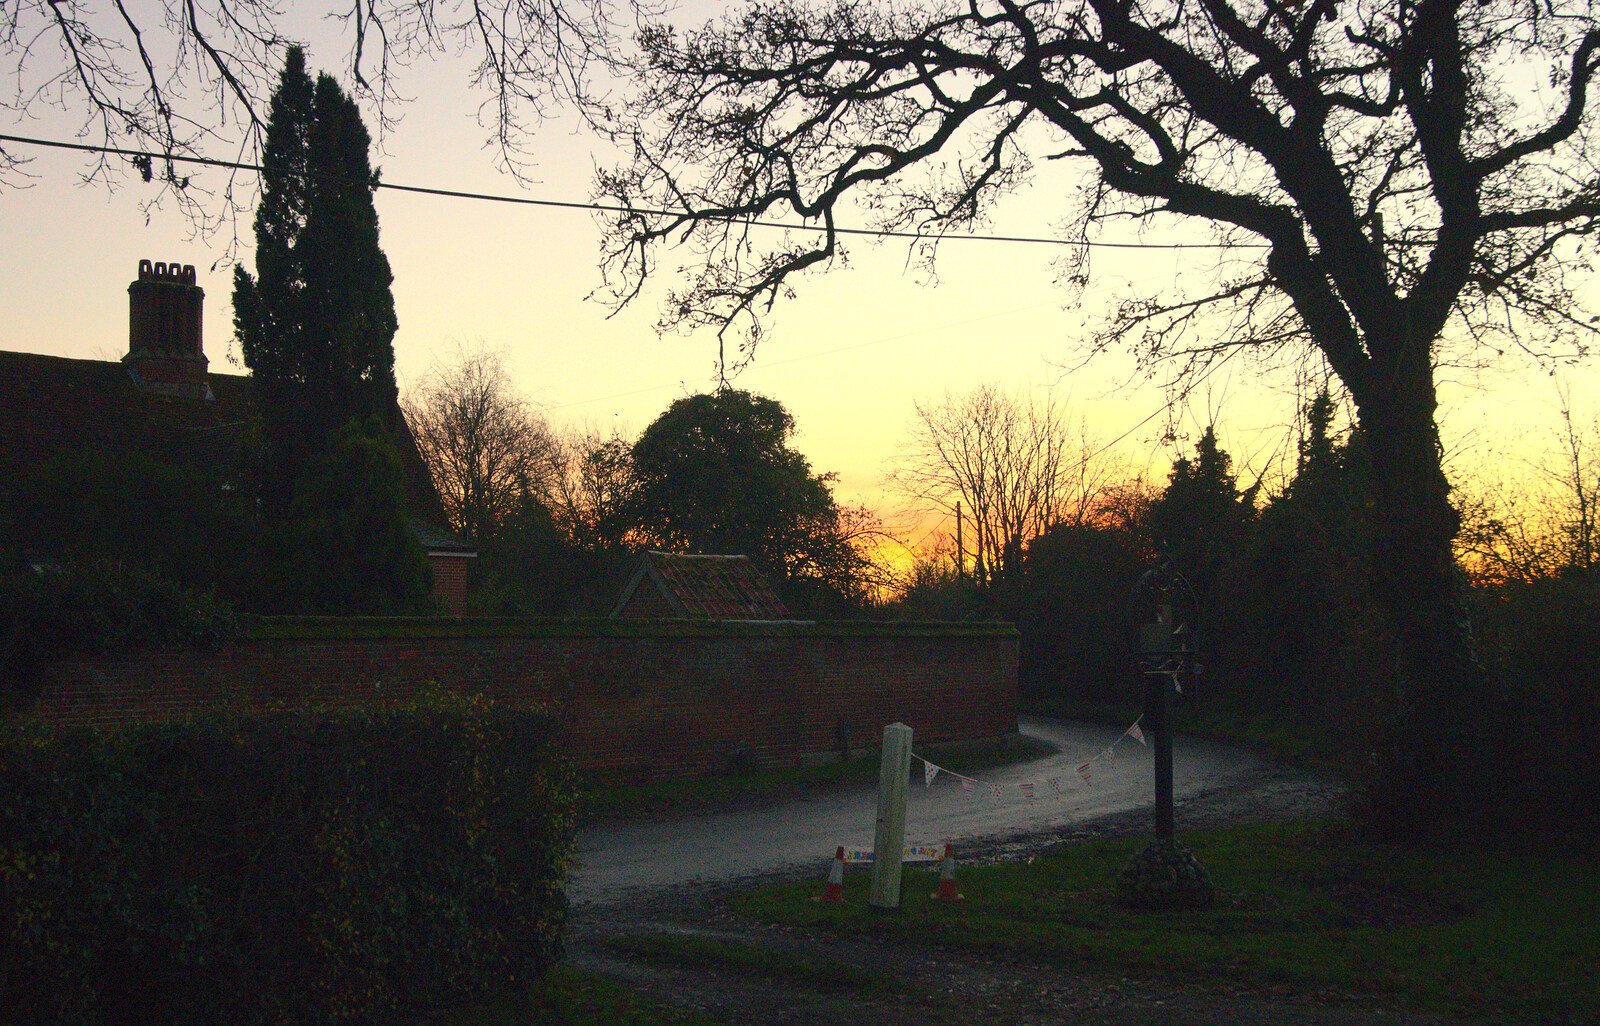 The sun sets in Thorpe Abbots from The Eye Lights and a Thorpe Abbots Birthday, Suffolk and Norfolk - 6th December 2014